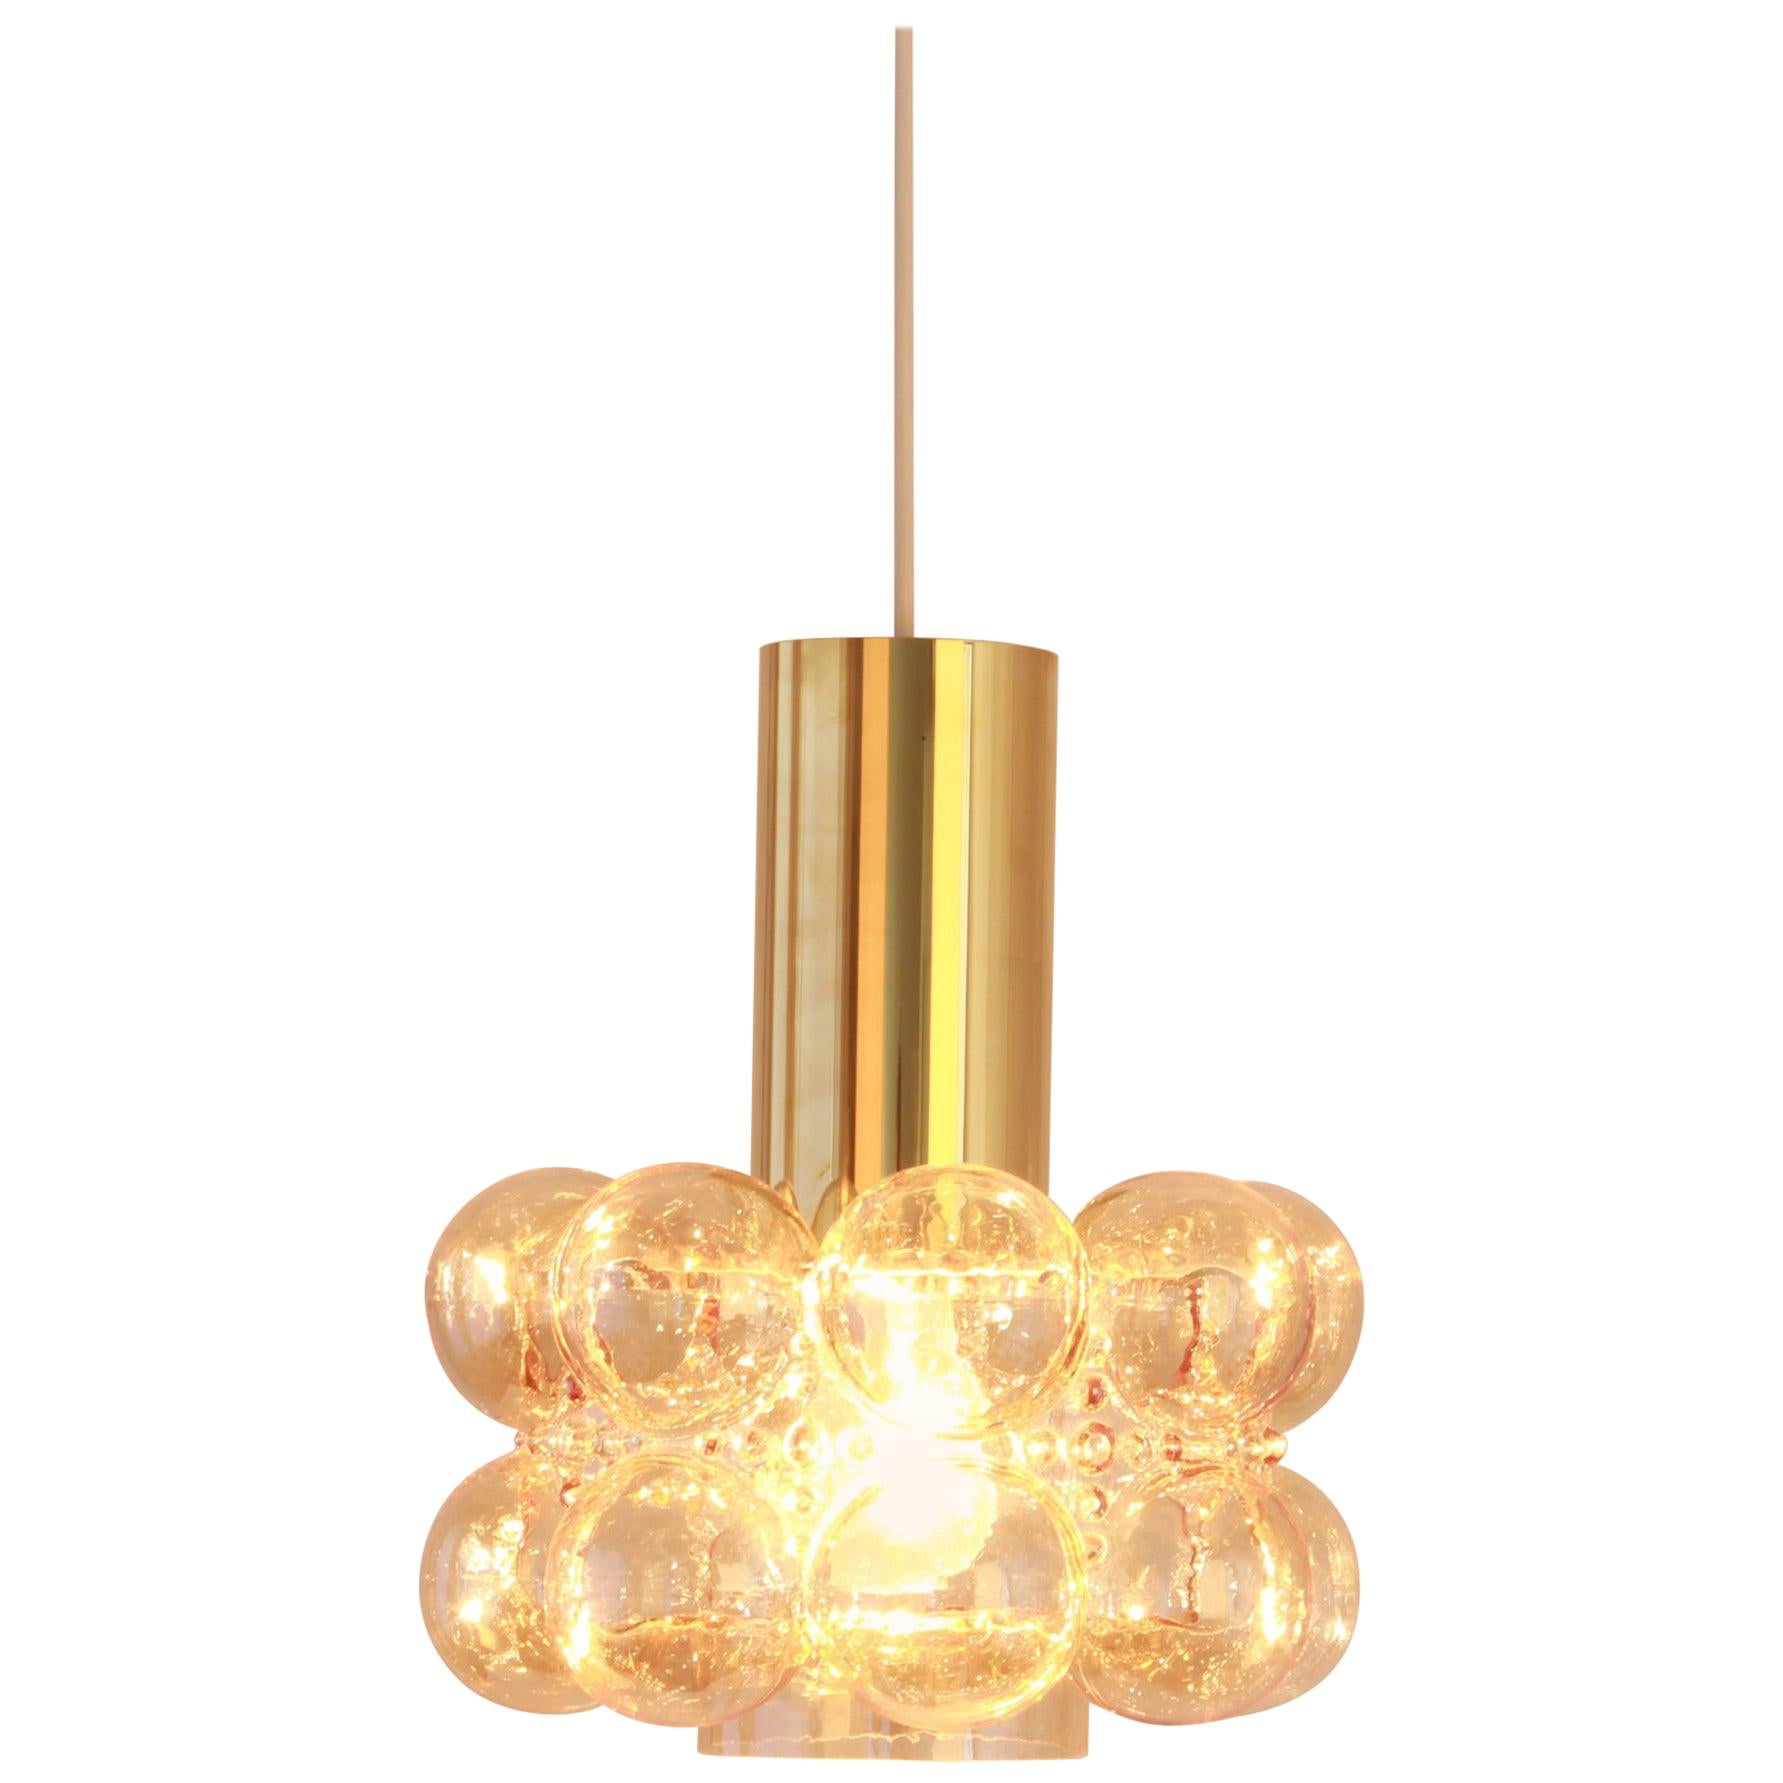 A round smoke tone bubble glass pendant designed by Helena Tynell for Limburg, manufactured in Germany, circa 1970s.

Sockets: Needs 1 x E27 standard bulb with 100W max each and compatible with the US/UK/ etc. standards
Drop rod can be adjusted